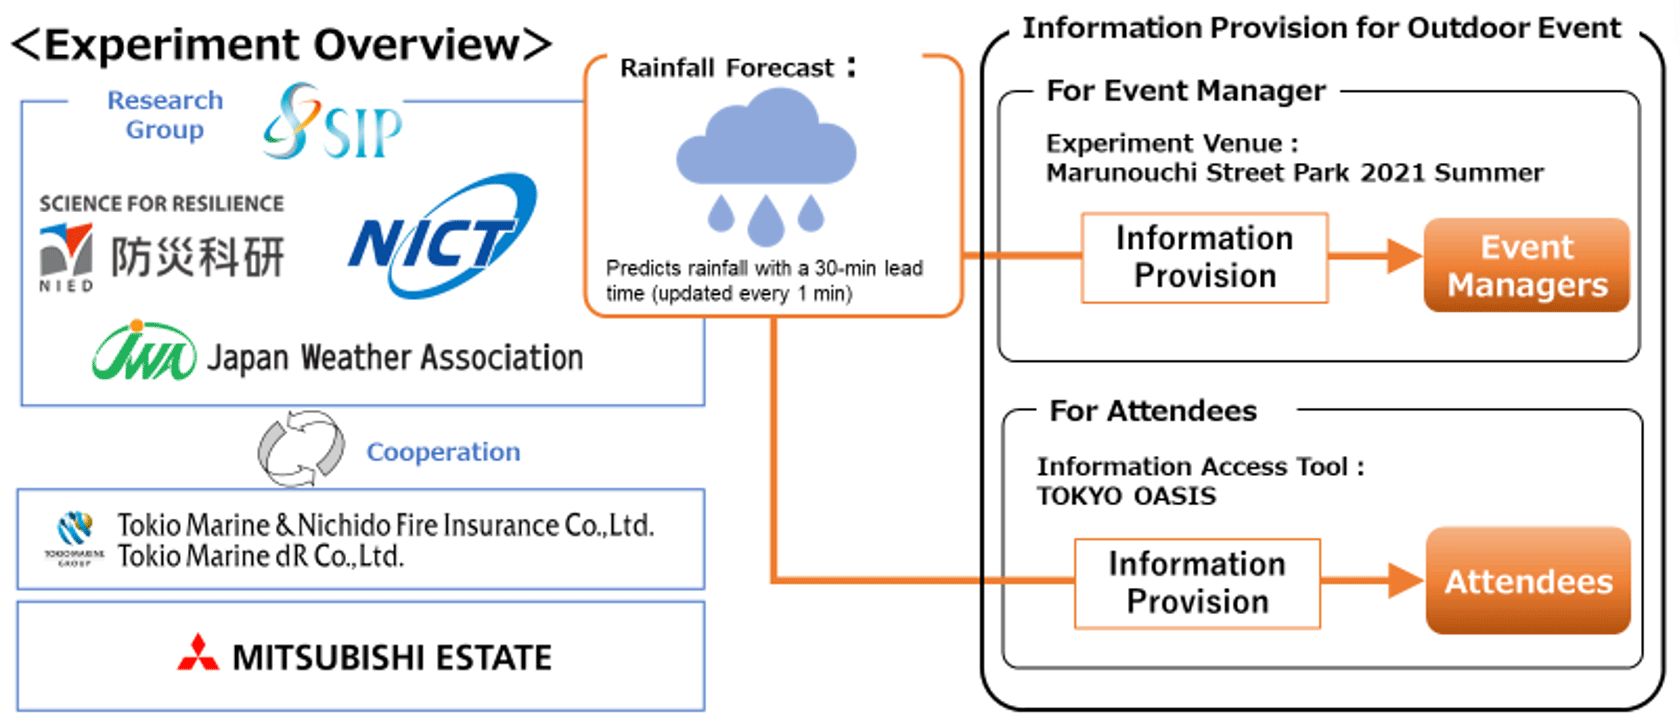 Proof of Concept Offered for Up-to-the-Minute Sudden Downpour Prediction System for Outdoor Events and More